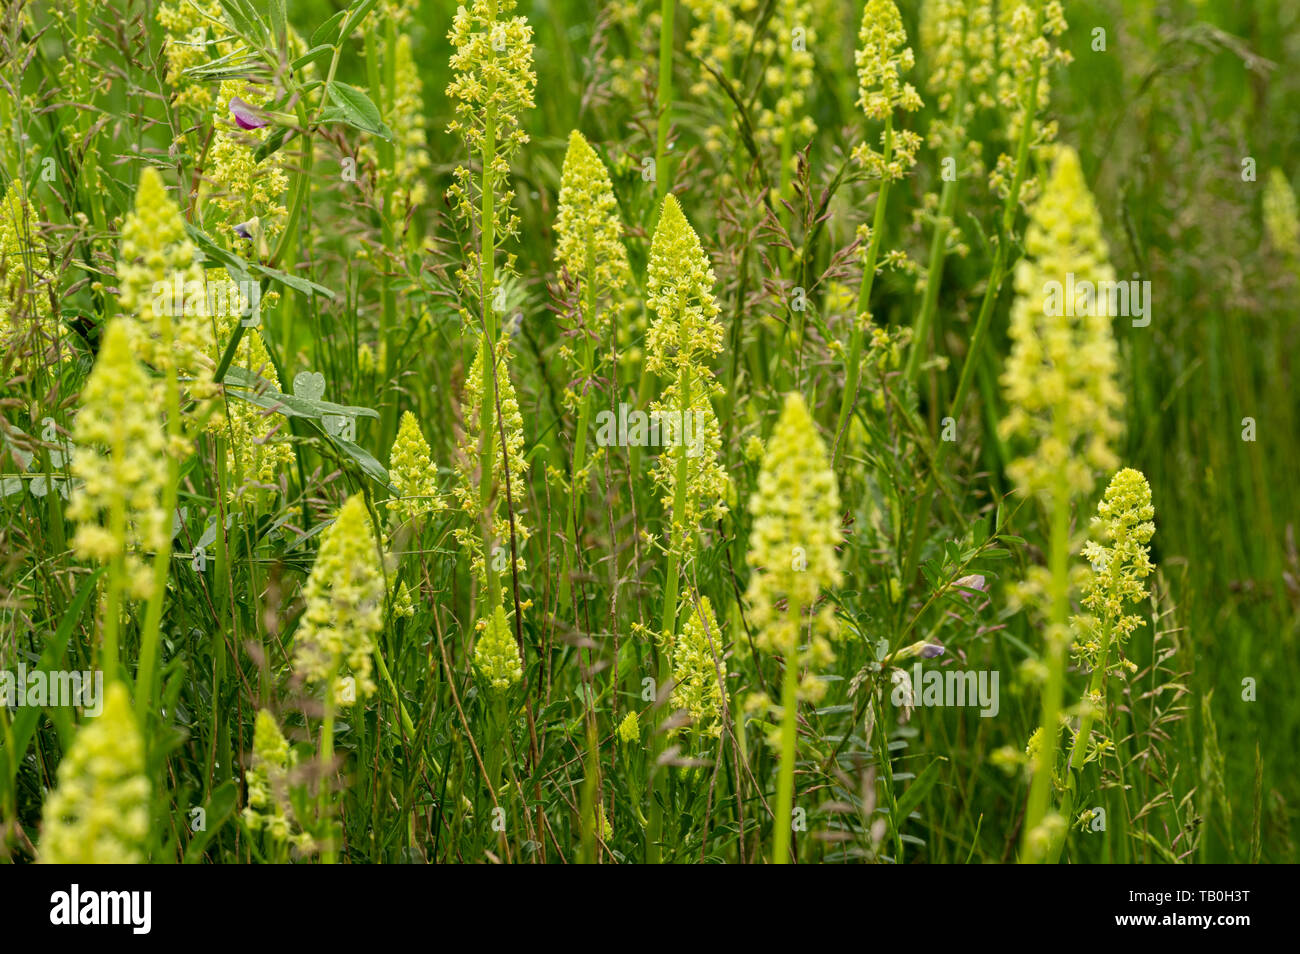 Reseda lutea - the yellow mignonette or wild mignonette - is a species of fragrant herbaceous plant native of Eurasia and North Africa. Its roots have Stock Photo